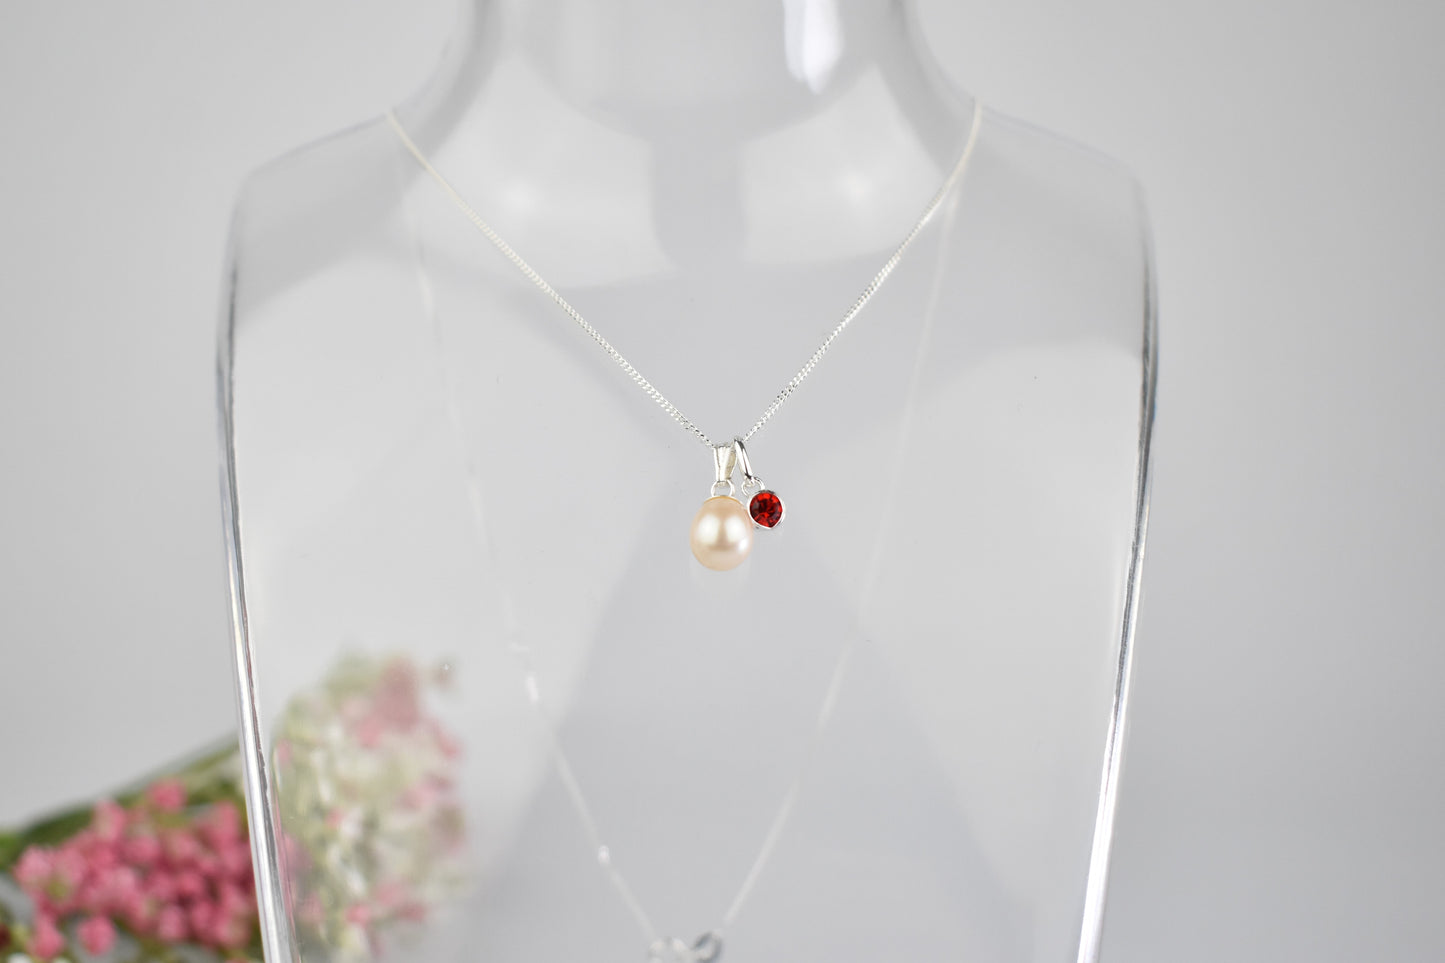 Freshwater pearl drop with one high quality crystal birthstone suspended from an extendable 16-18" sterling silver chain